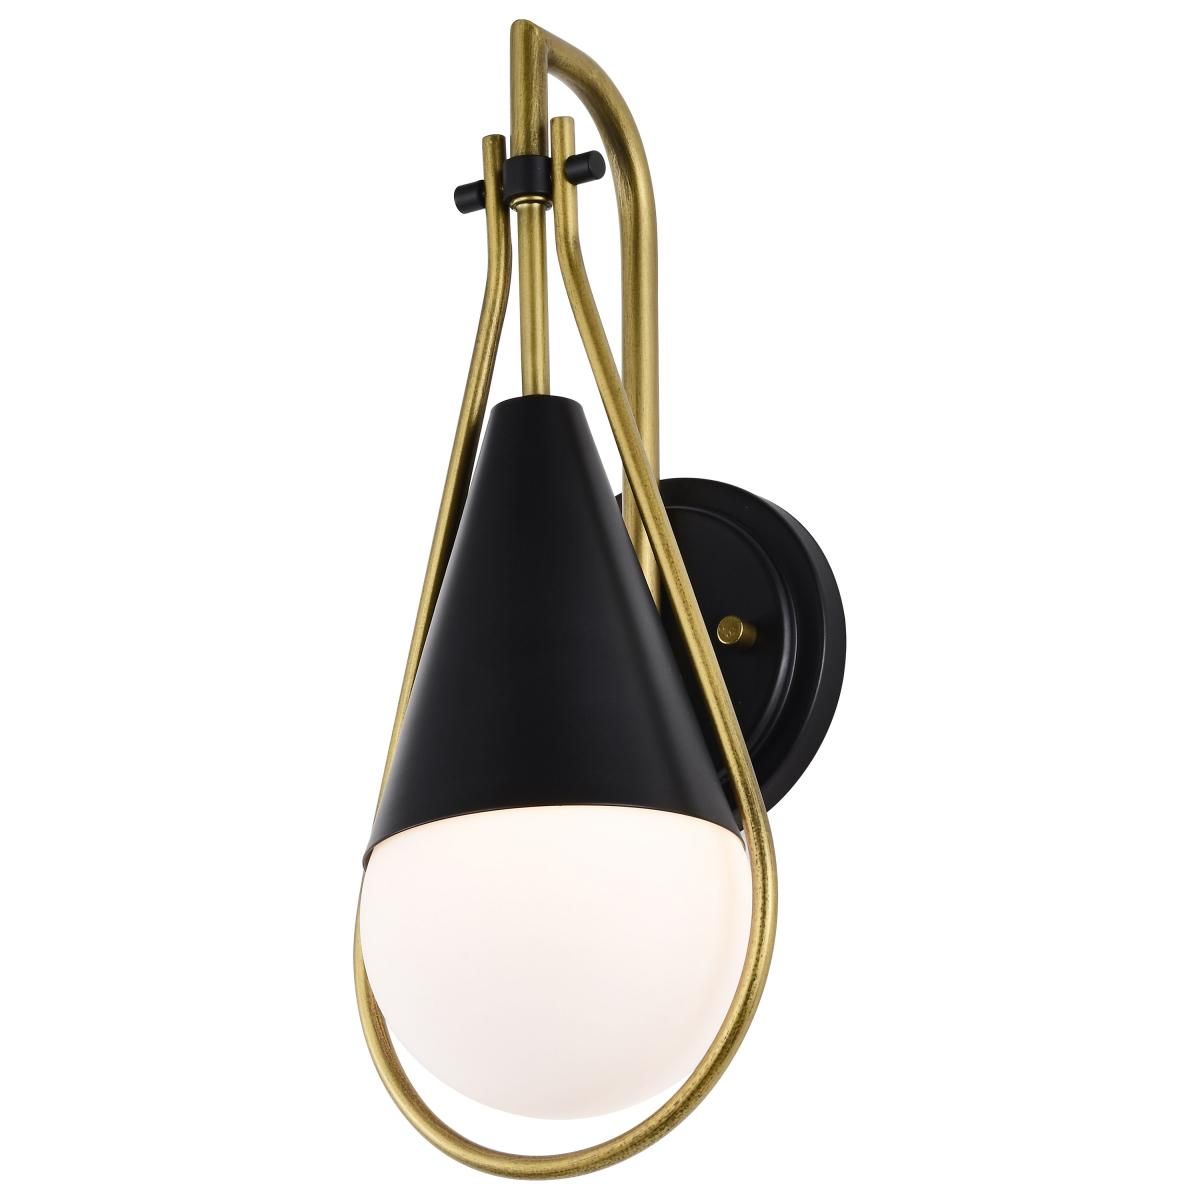 Admiral 15 in. Wall Sconce Matte Black - Bees Lighting